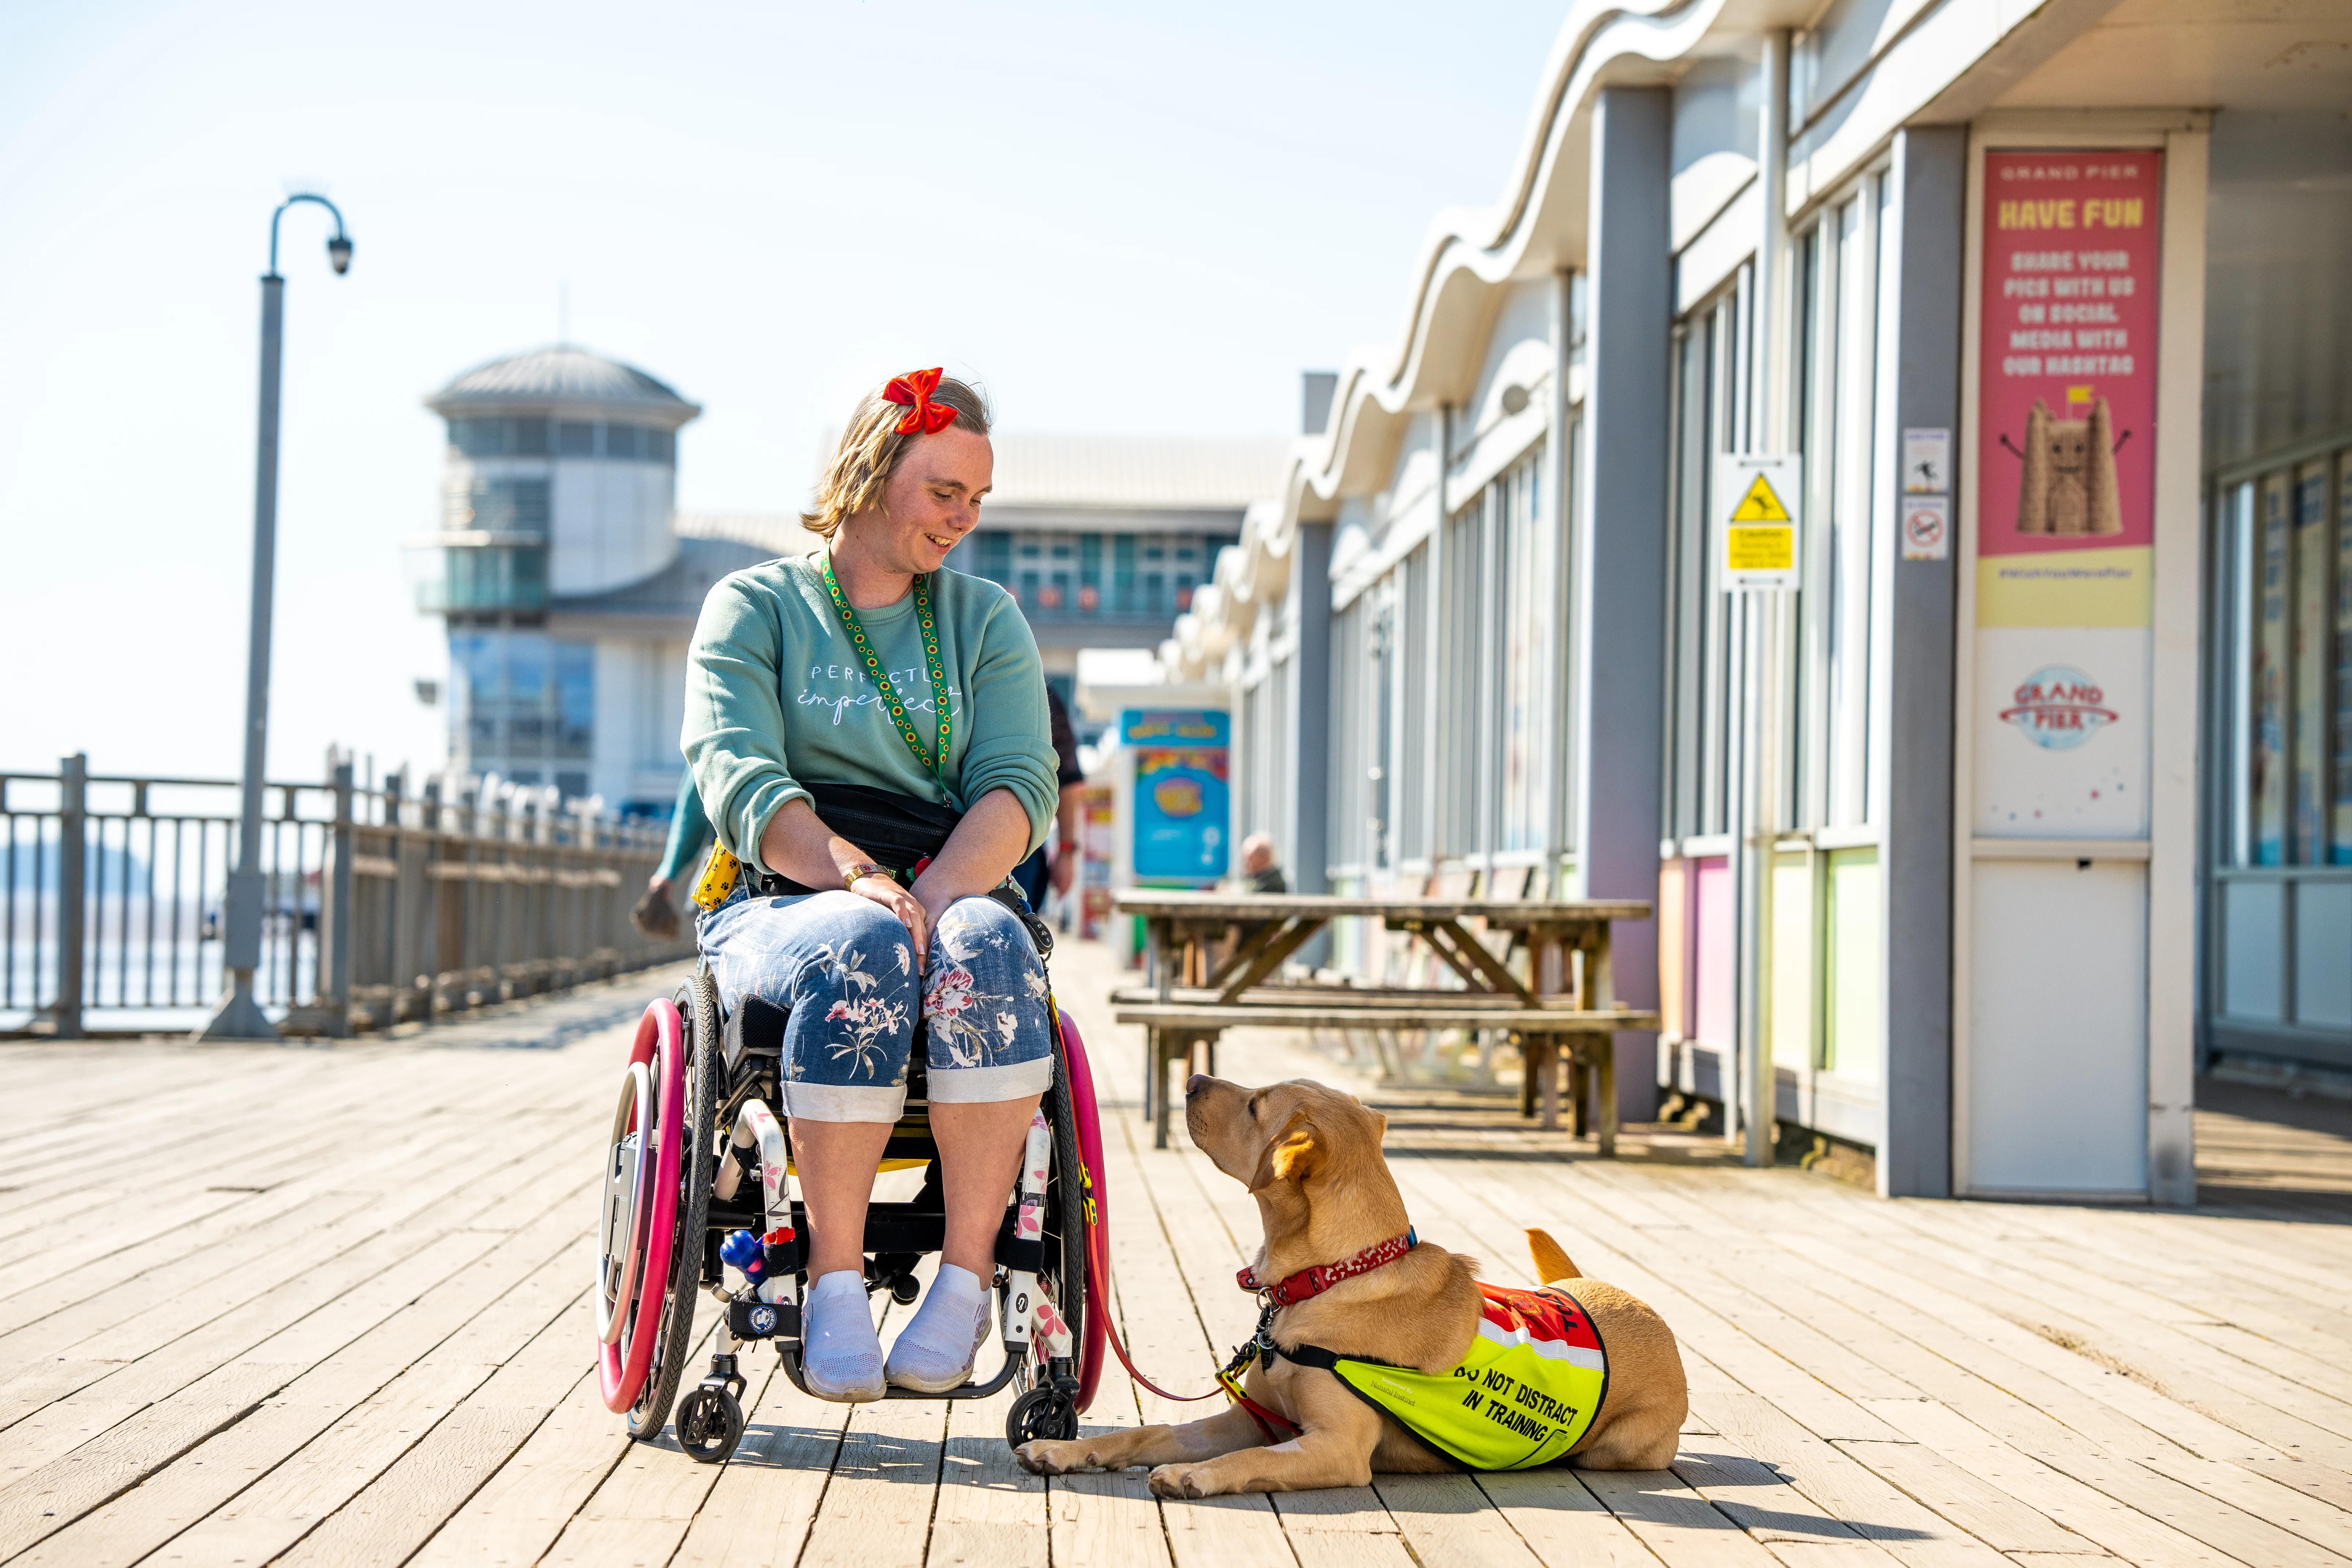 Lady with blond hair and a pale green top and trainers, sat in a wheel chair, looking down at a guide dog. They are on the wooden boardwalk of the Grand Pier.